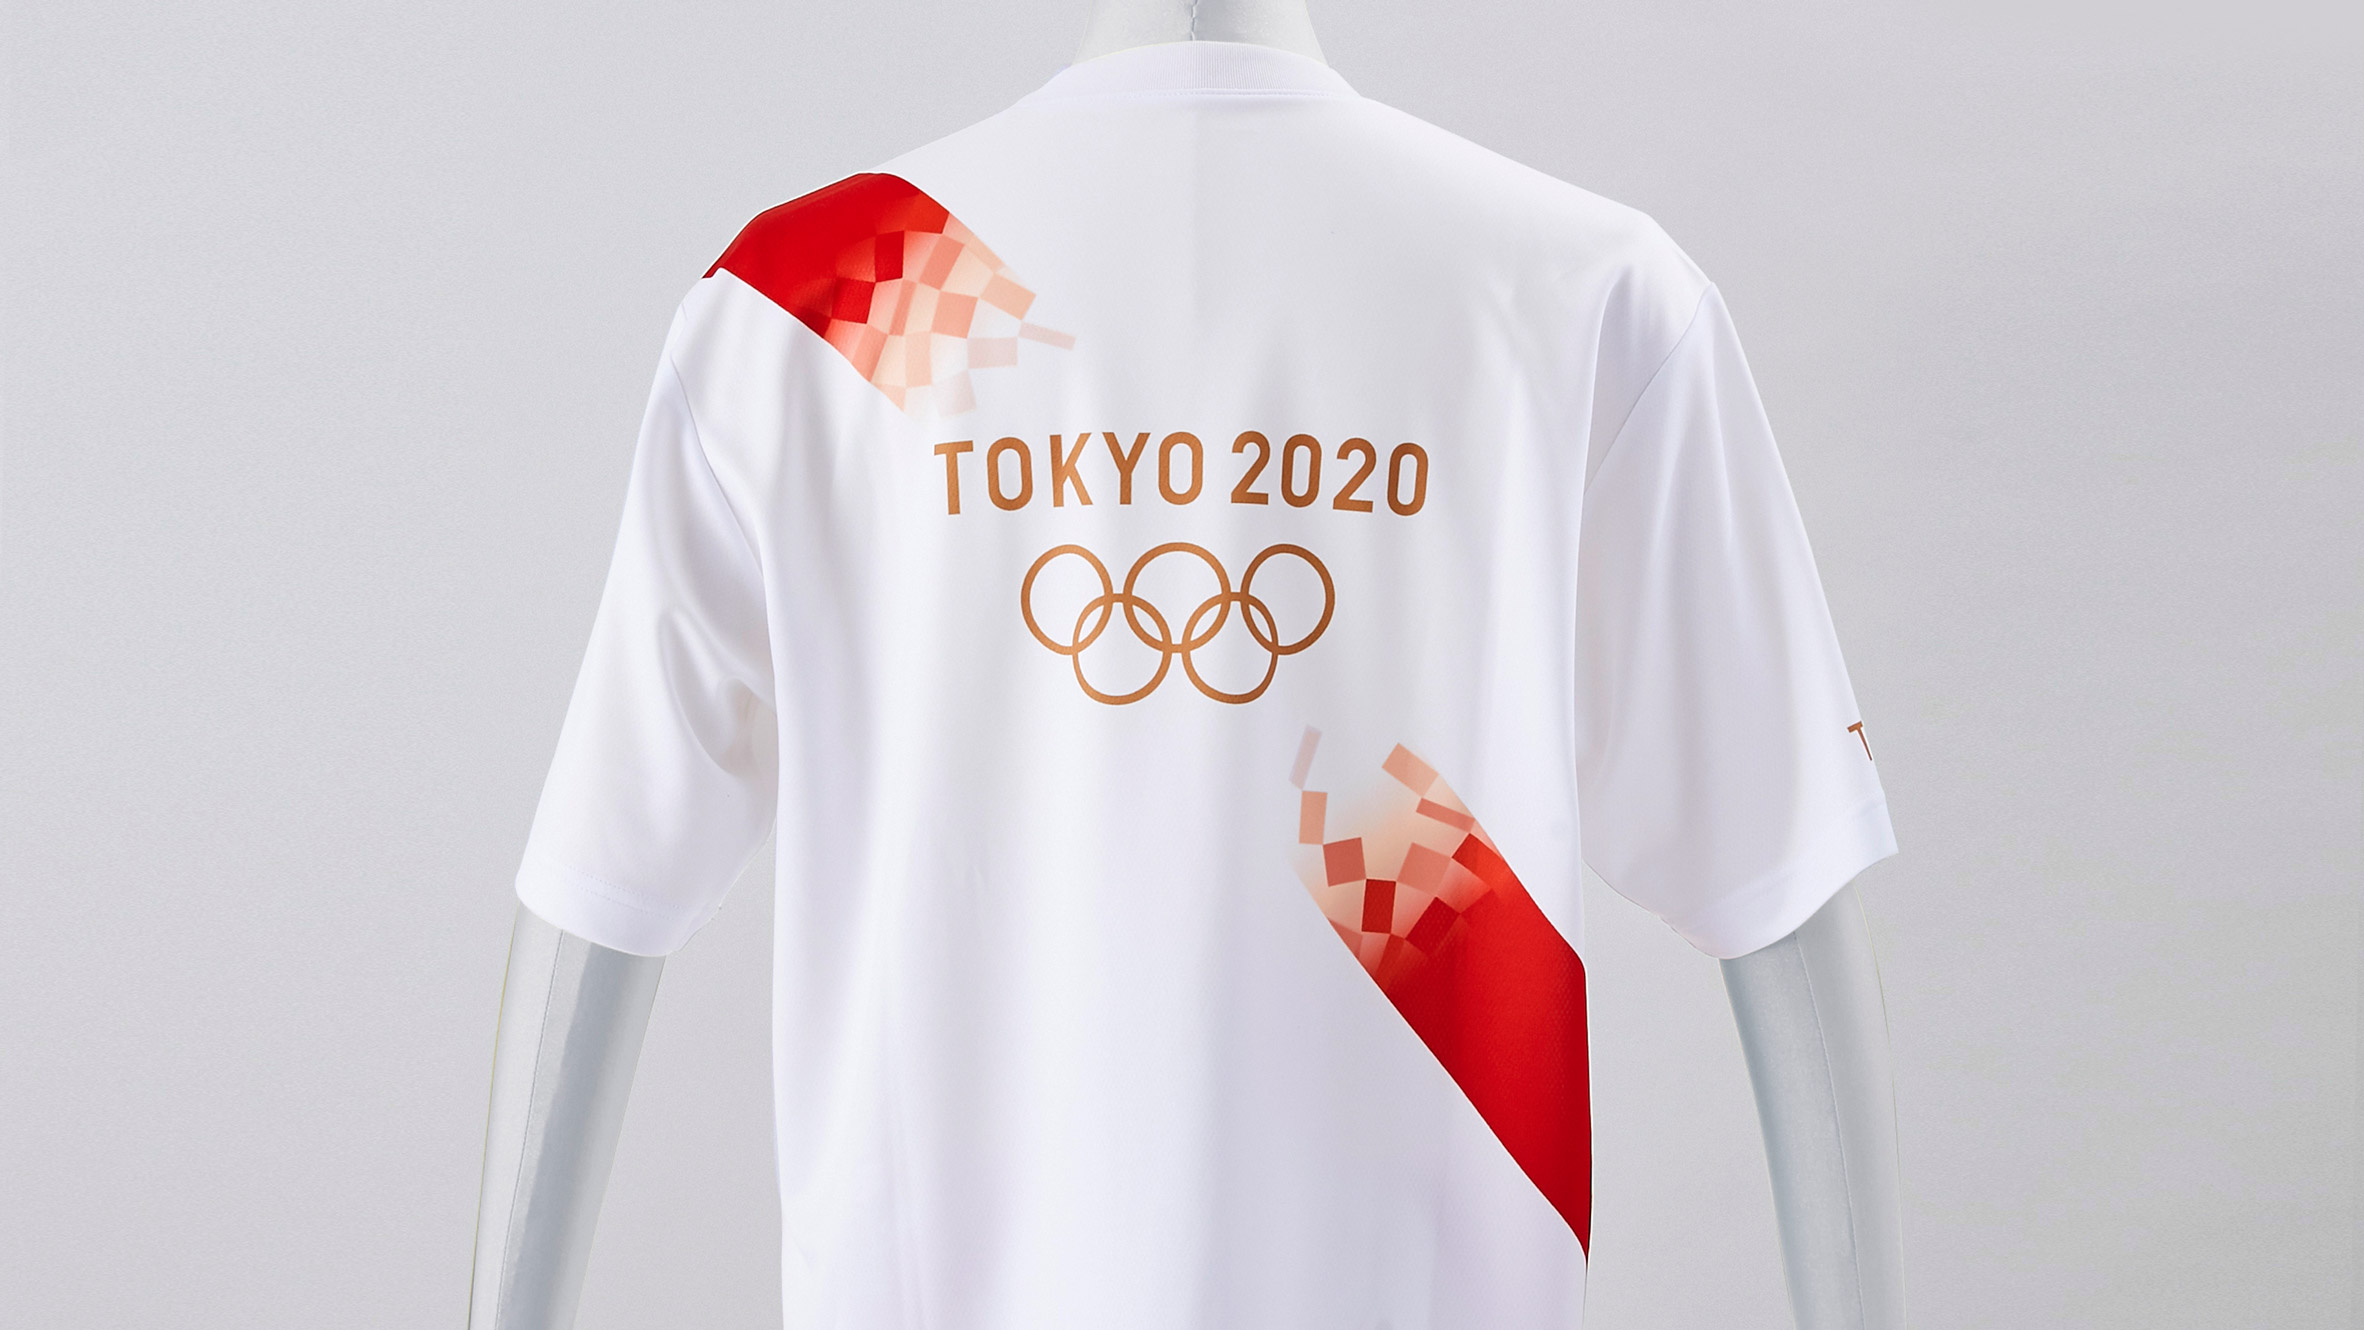 Tokyo Olympic torchbearers wear uniforms made from plastic bottles